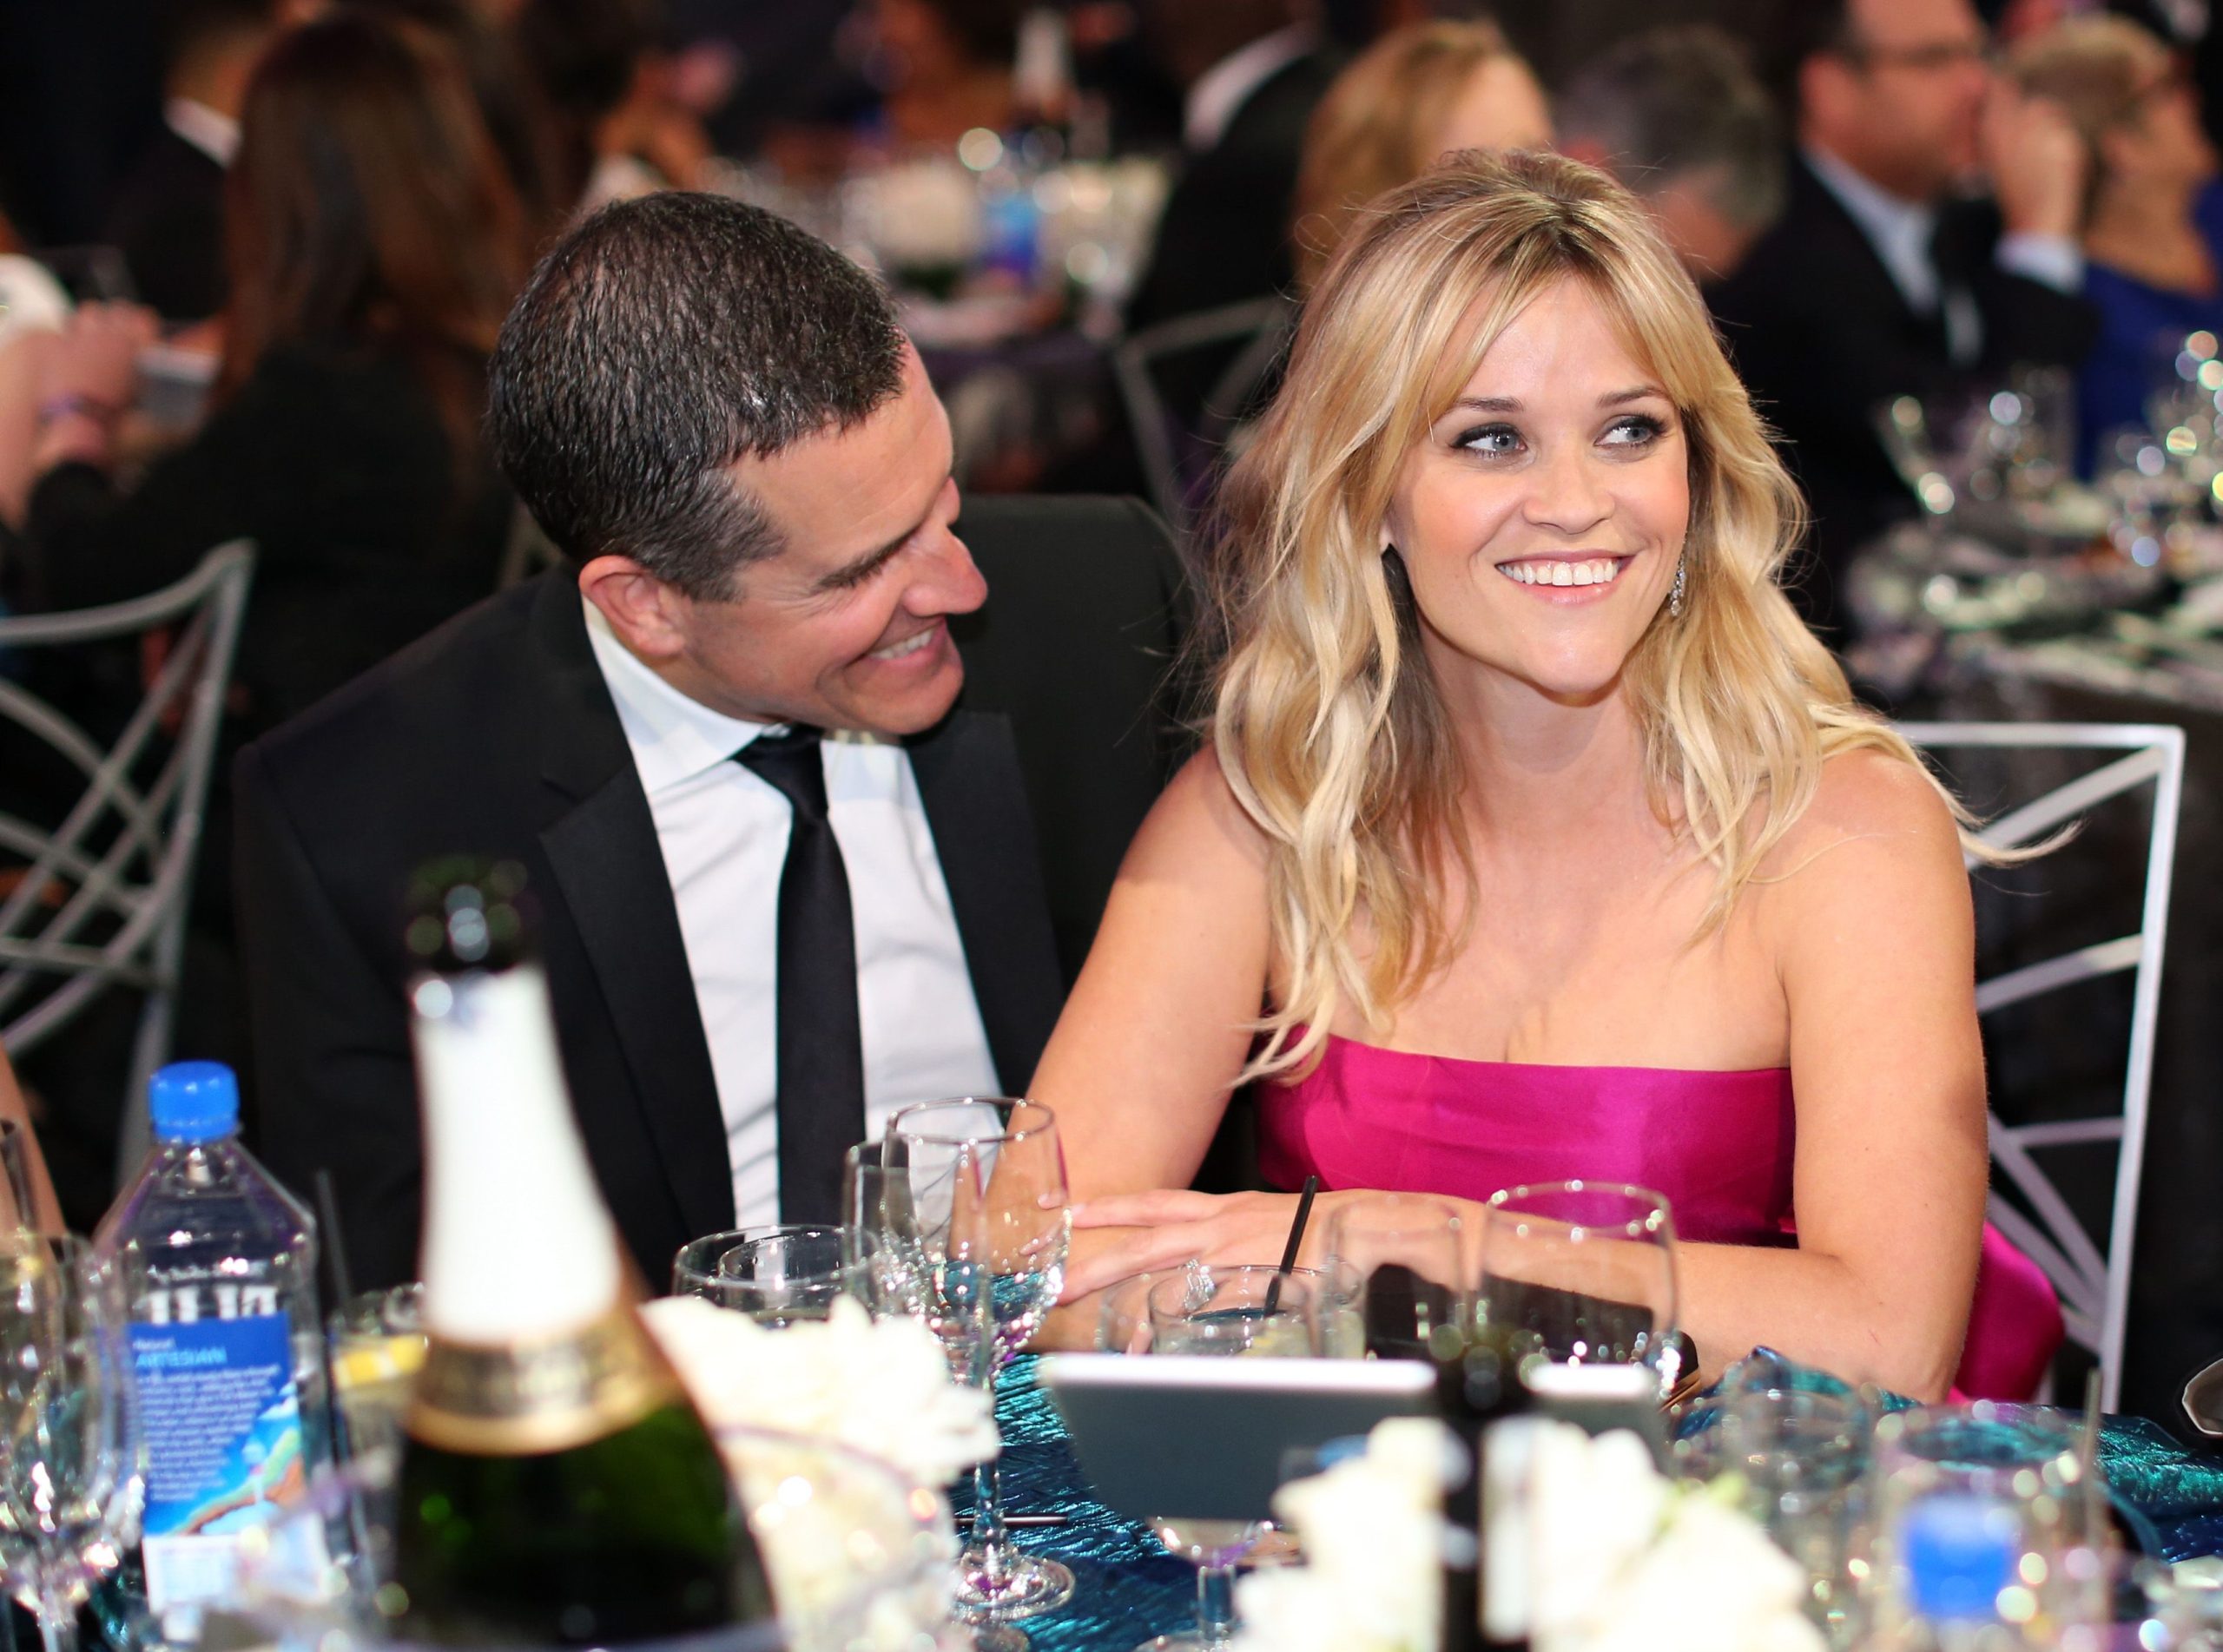 Actress Reese Witherspoon and Husband Jim Toth Call it Quits: Power Couple No More!